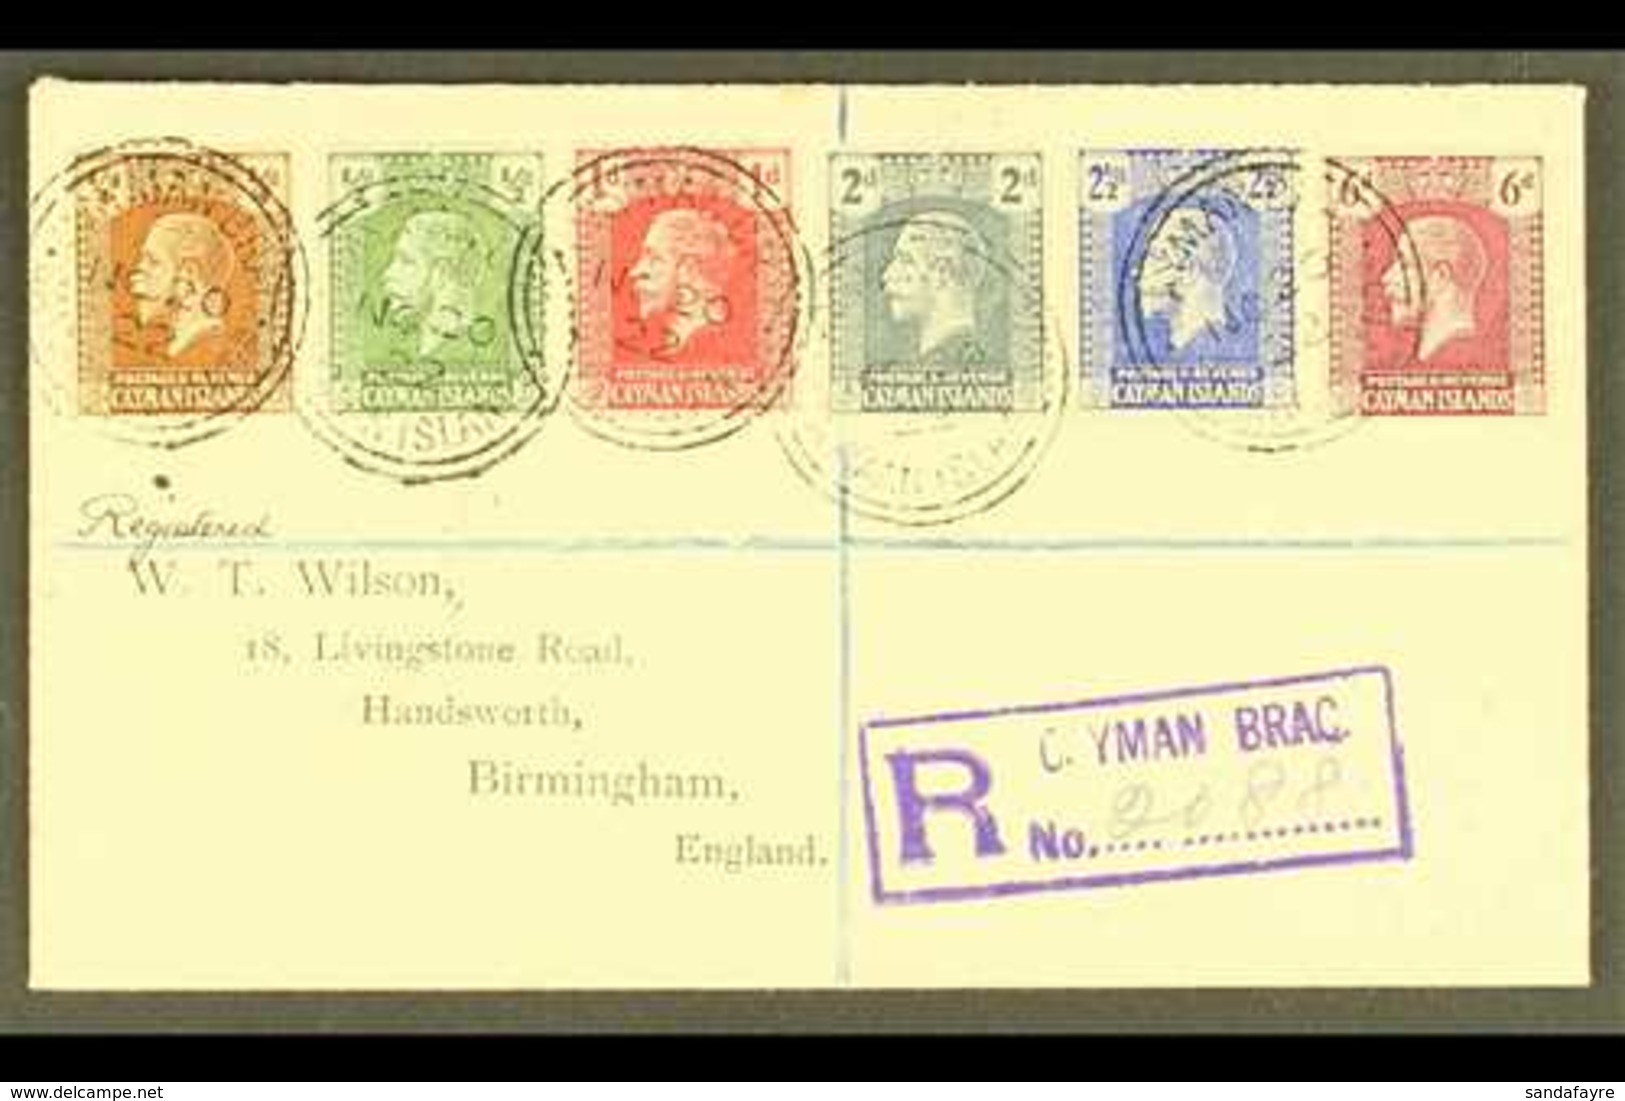 1922 (Nov) Attractive "Wilson" Registered Cover To England, Bearing 1921-26 ¼d, ½d, 1d, 2d, 2½d And 6d Tied CAYMAN BRAC  - Caimán (Islas)